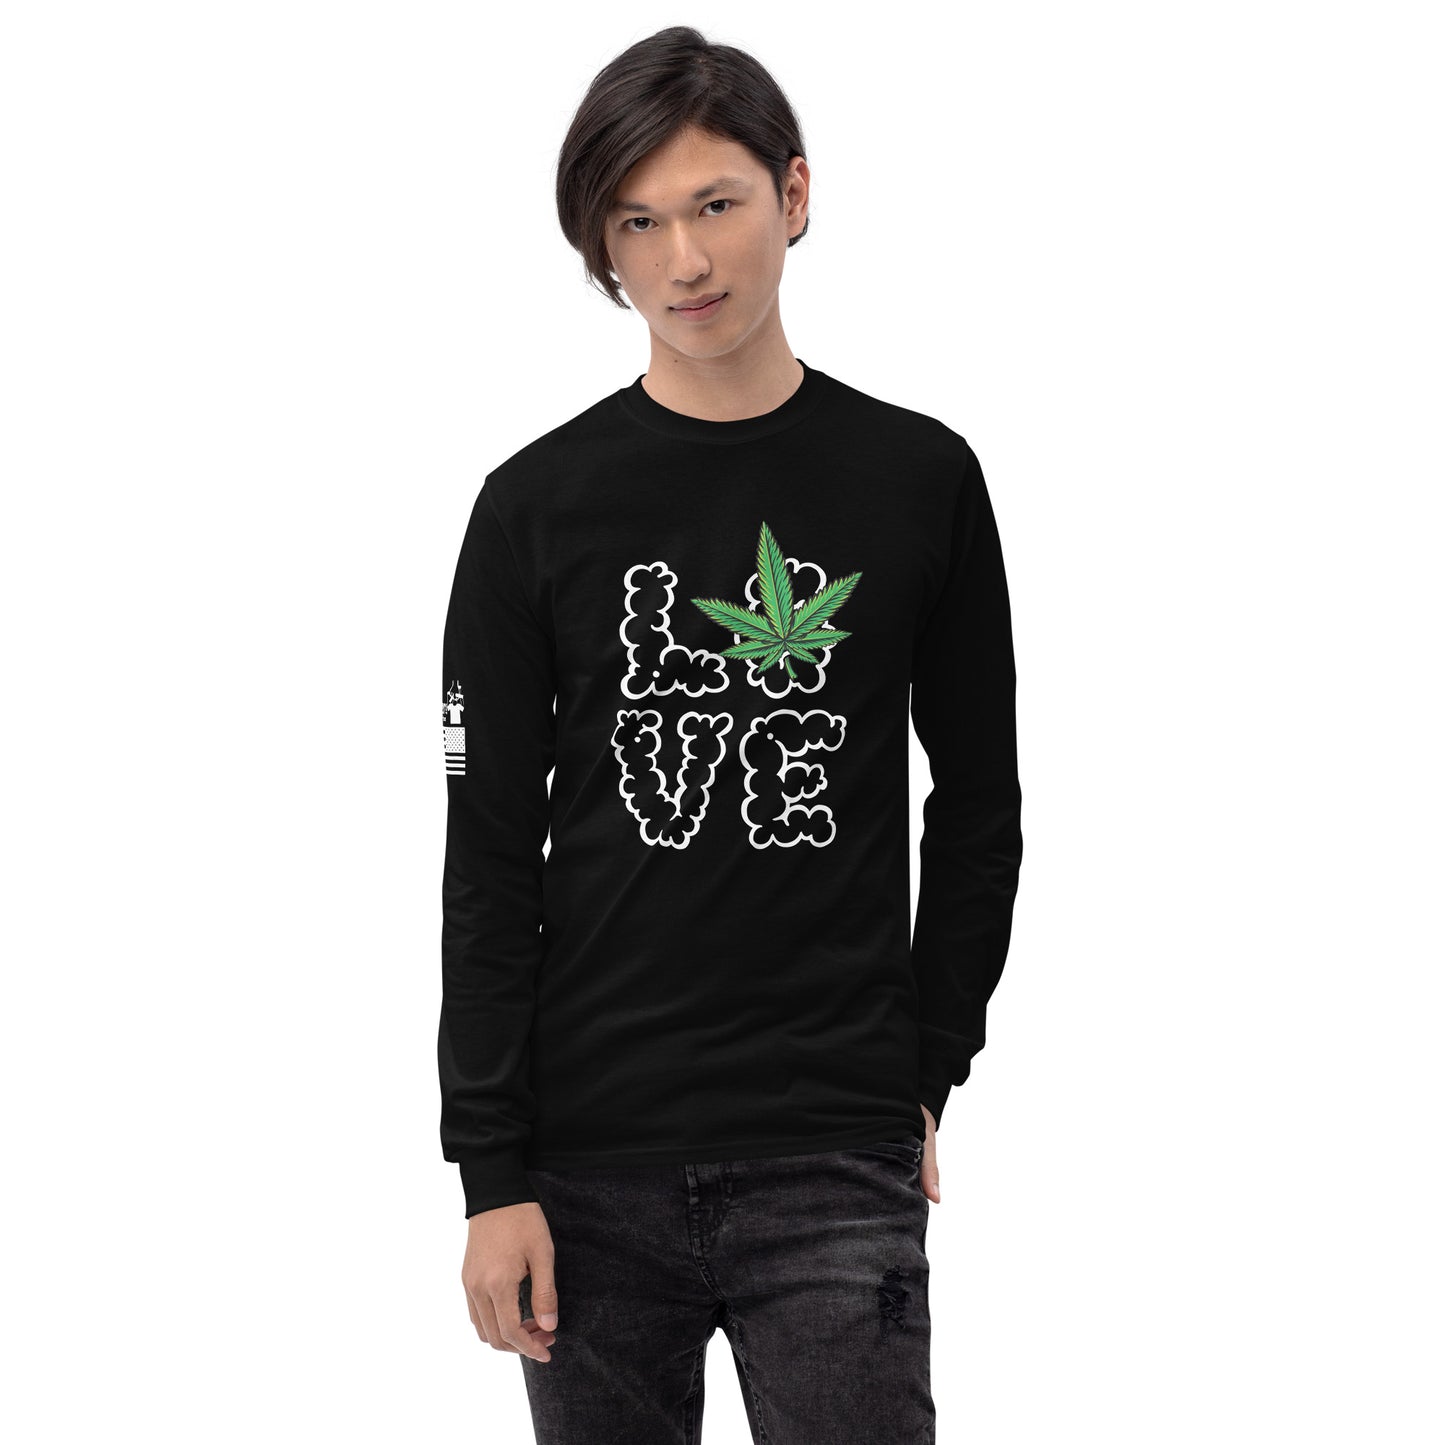 Love Weed - Long Sleeve Shirt | TheShirtfather